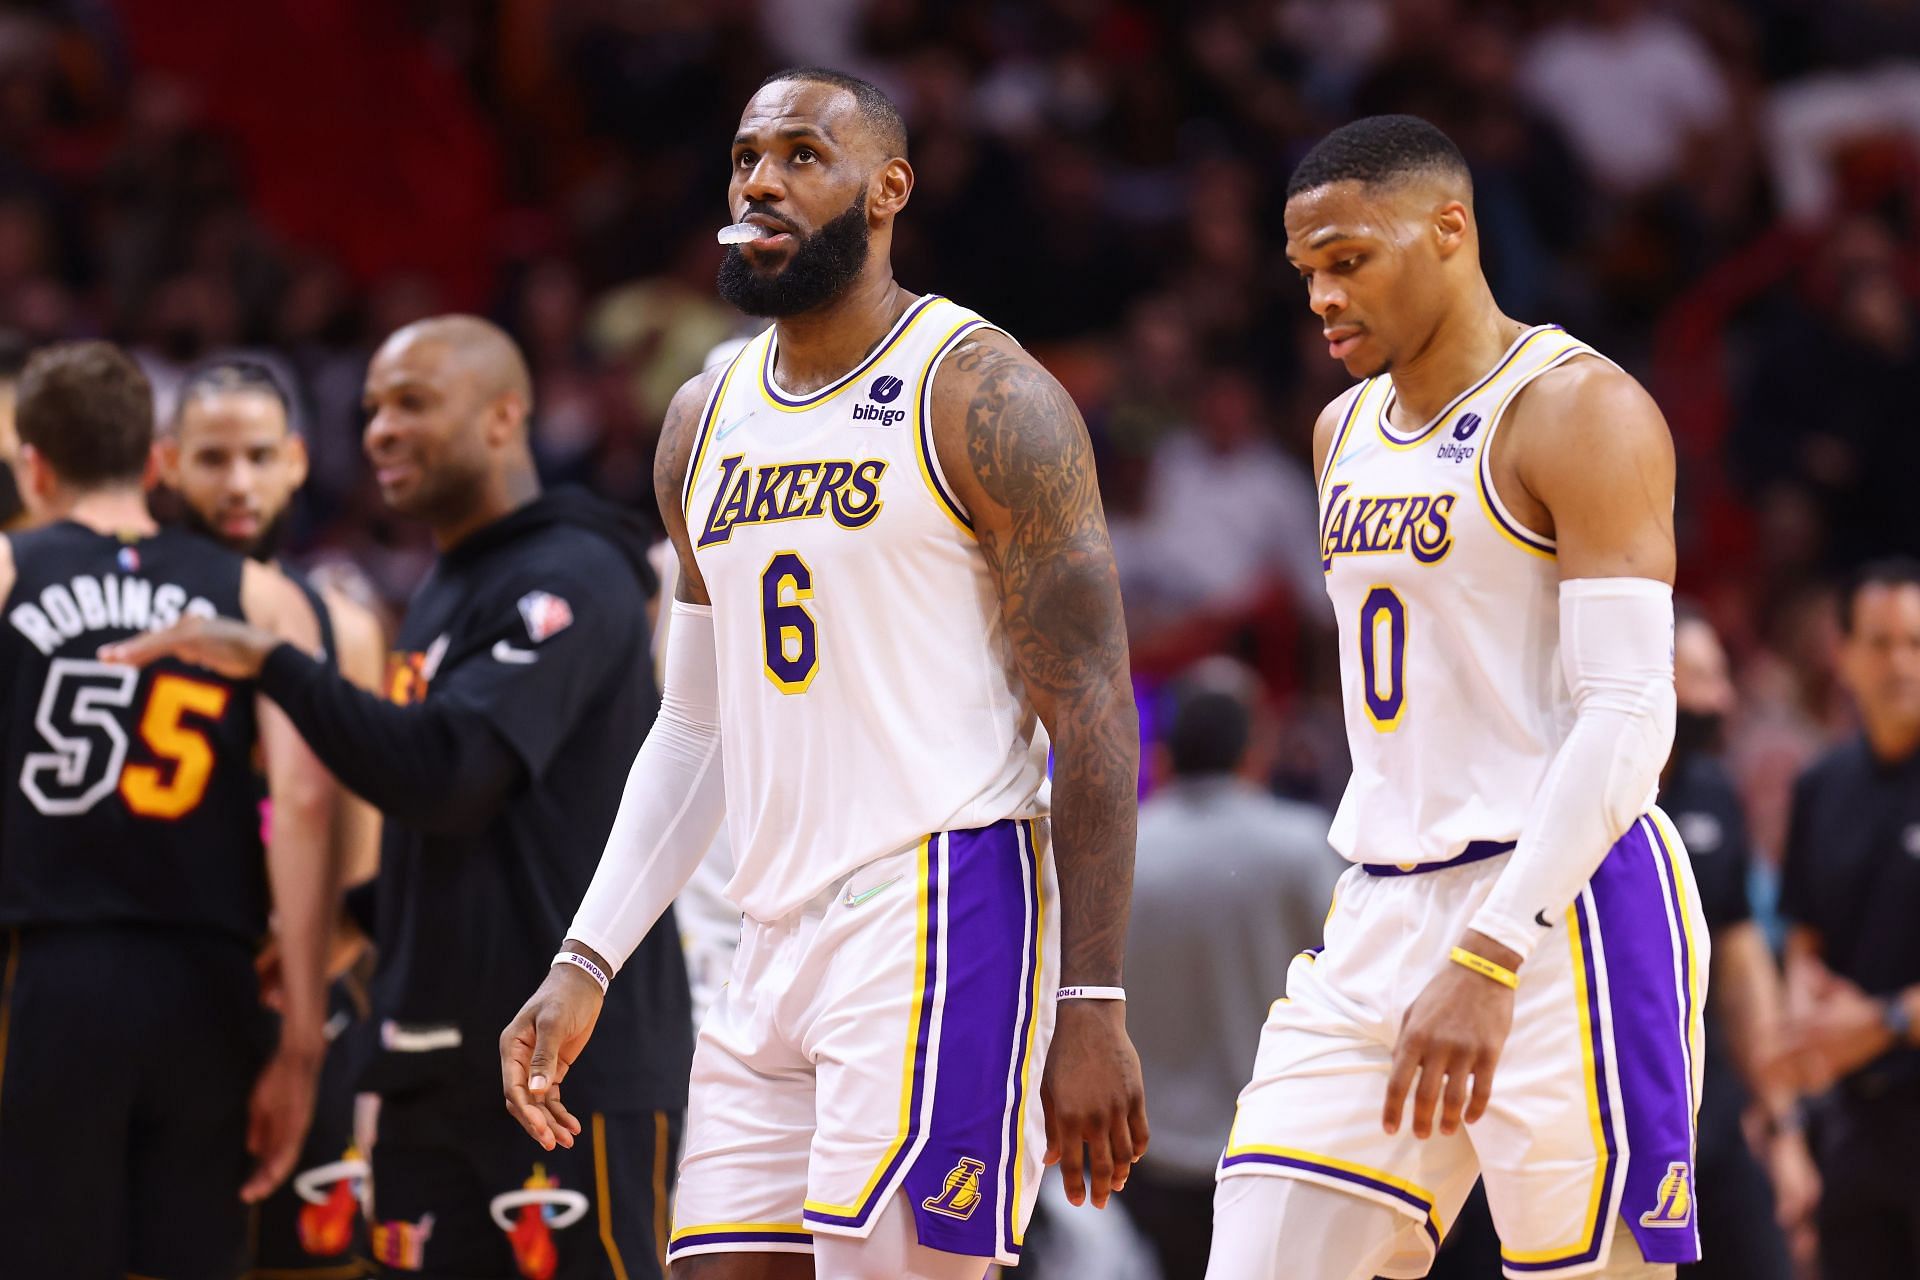 Los Angeles Lakers forward LeBron James and guard Russell Westbrook